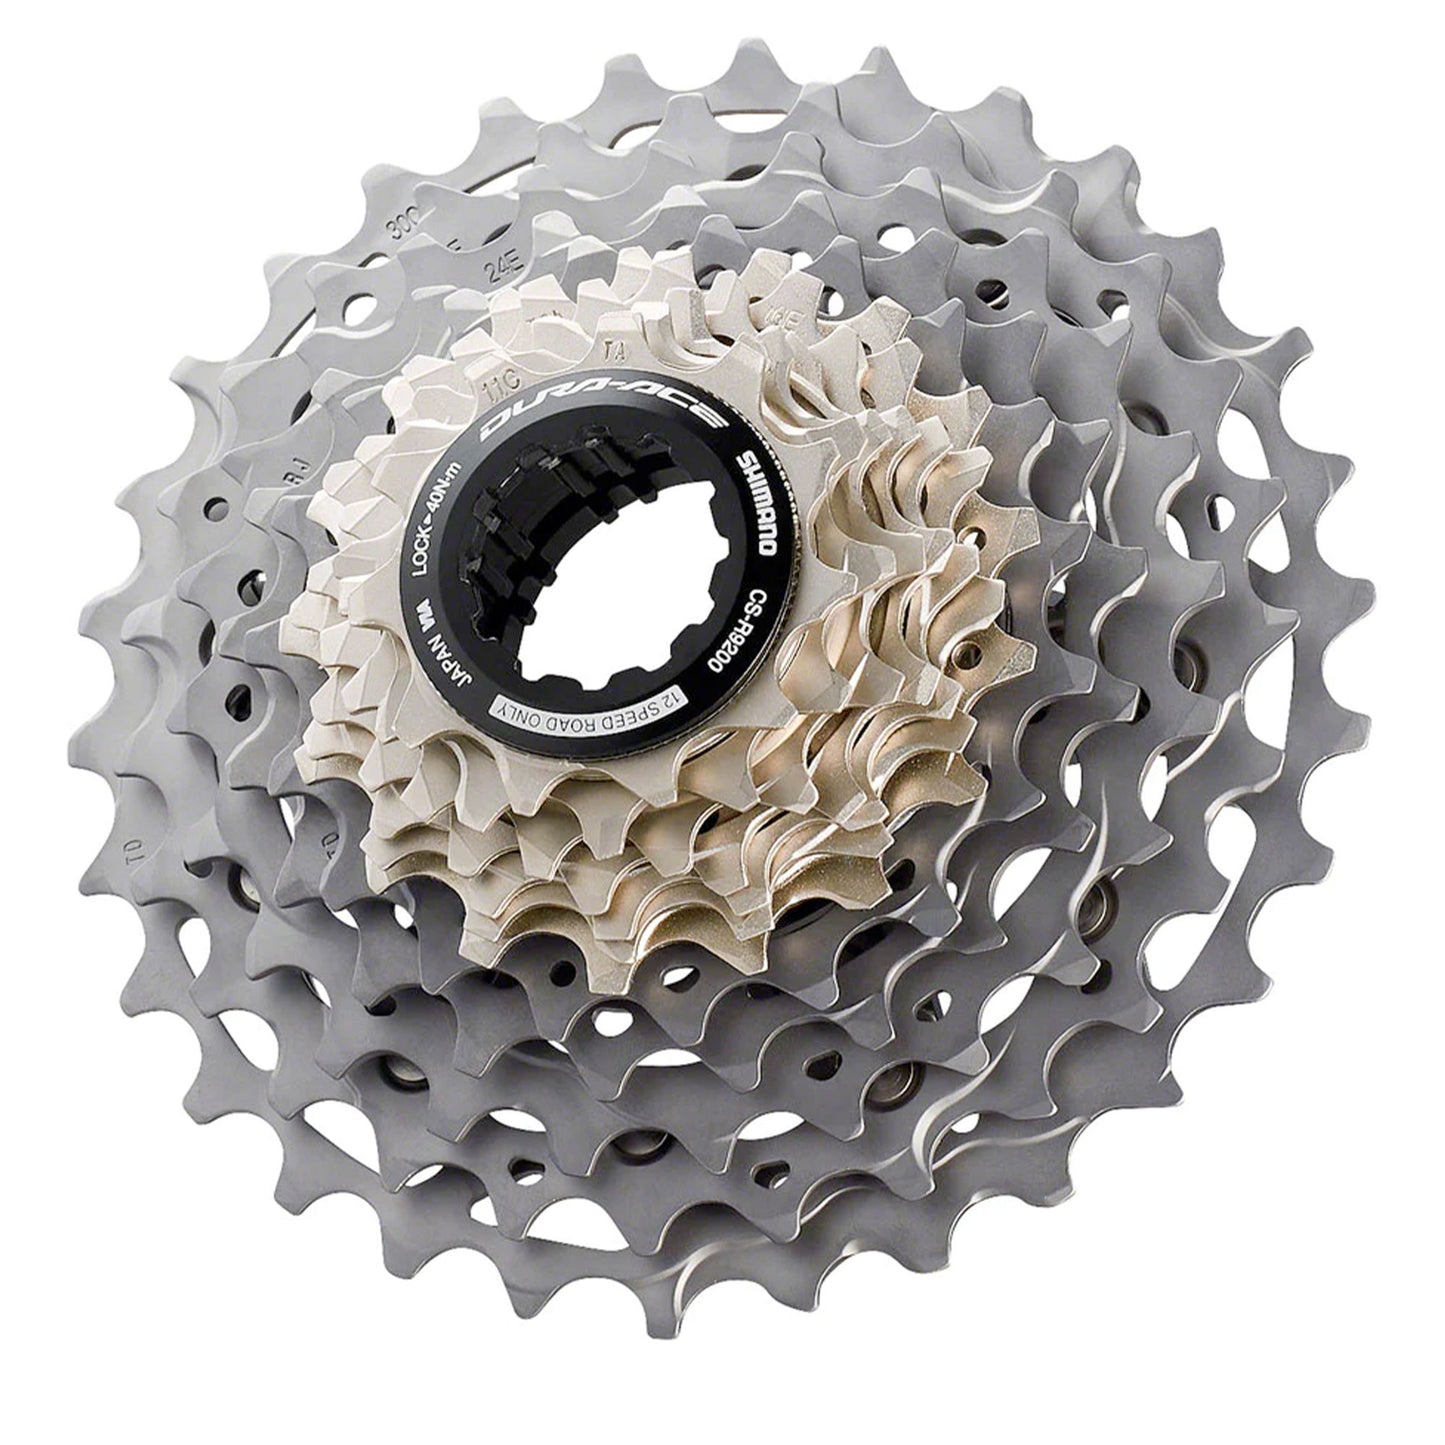 Shimano Dura-Ace CS-R9200 12 Speed Cassette, 11-30 Tooth